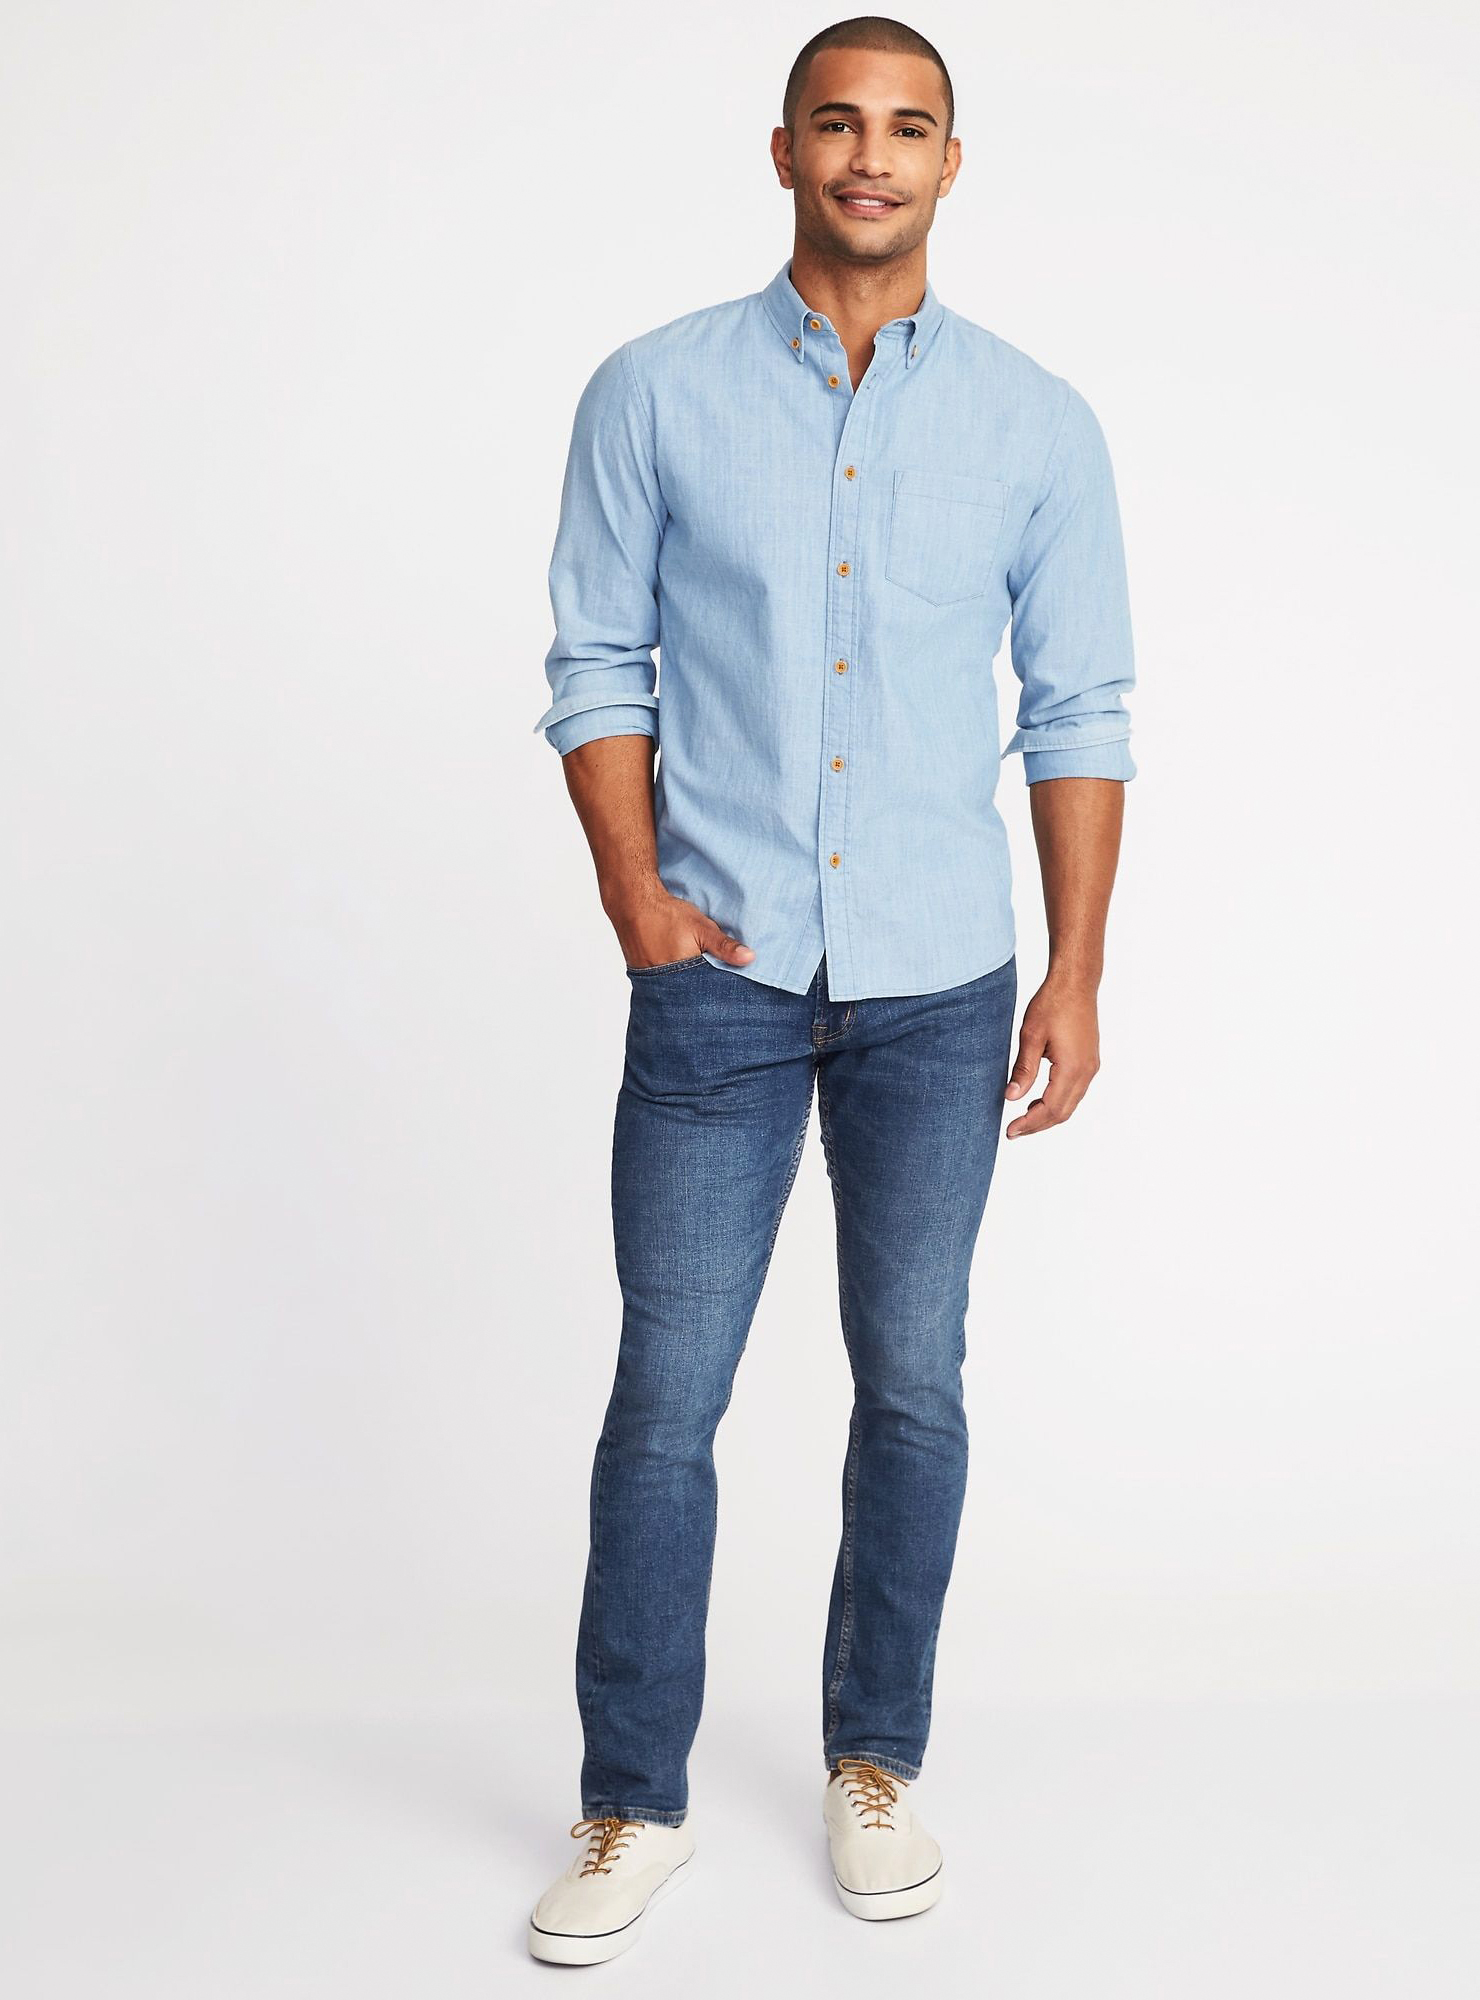 light blue button down shirt, blue jeans, and white sneakers